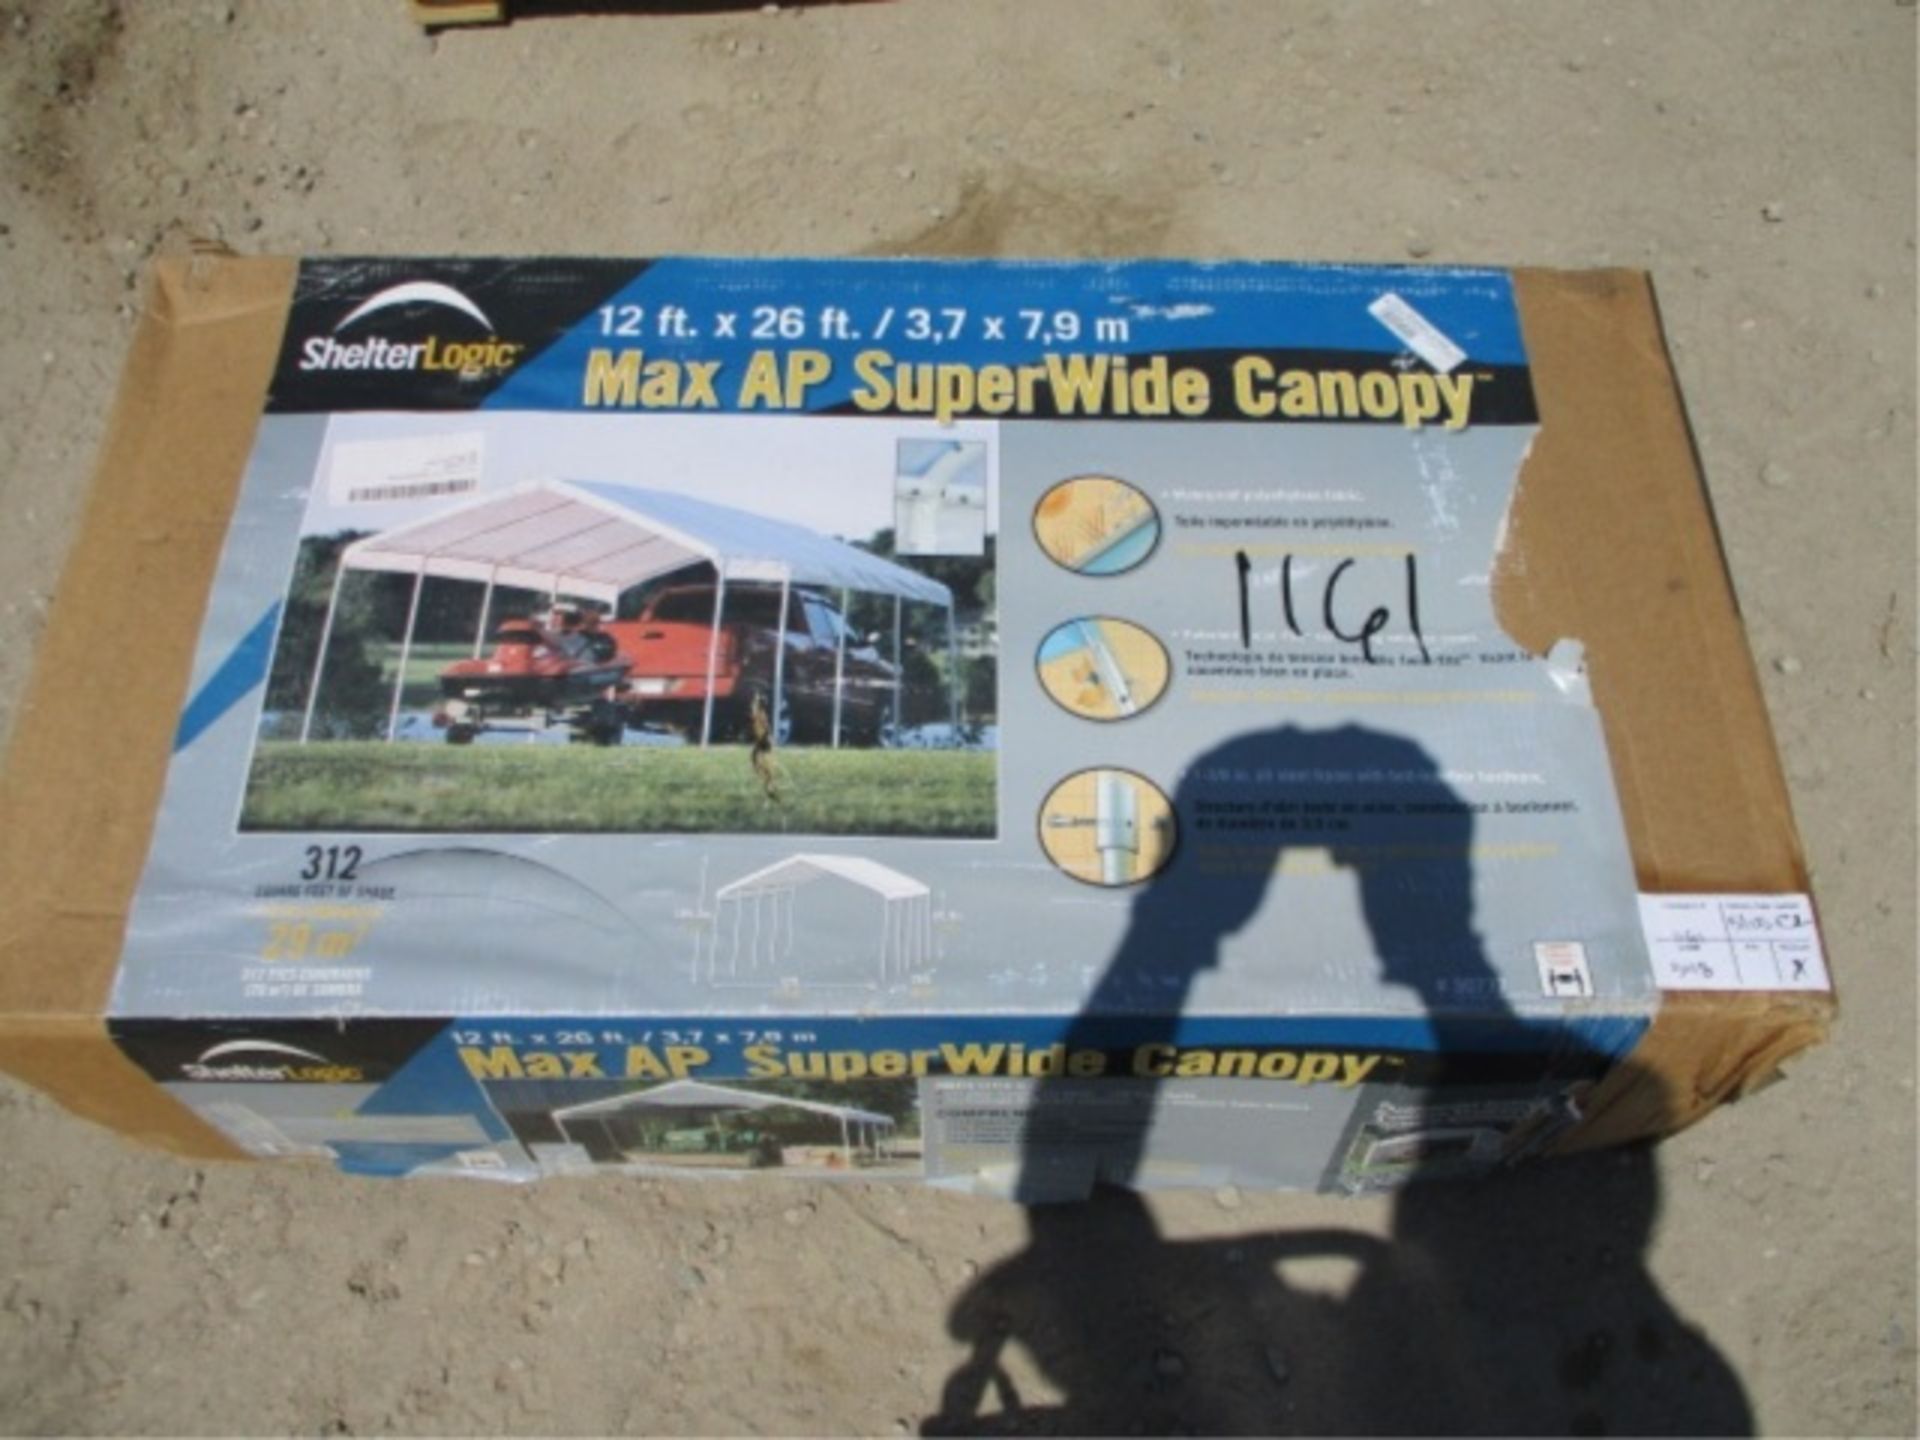 17' x 26' Shelter Logic Max AP Superwide Canopy - Image 9 of 9